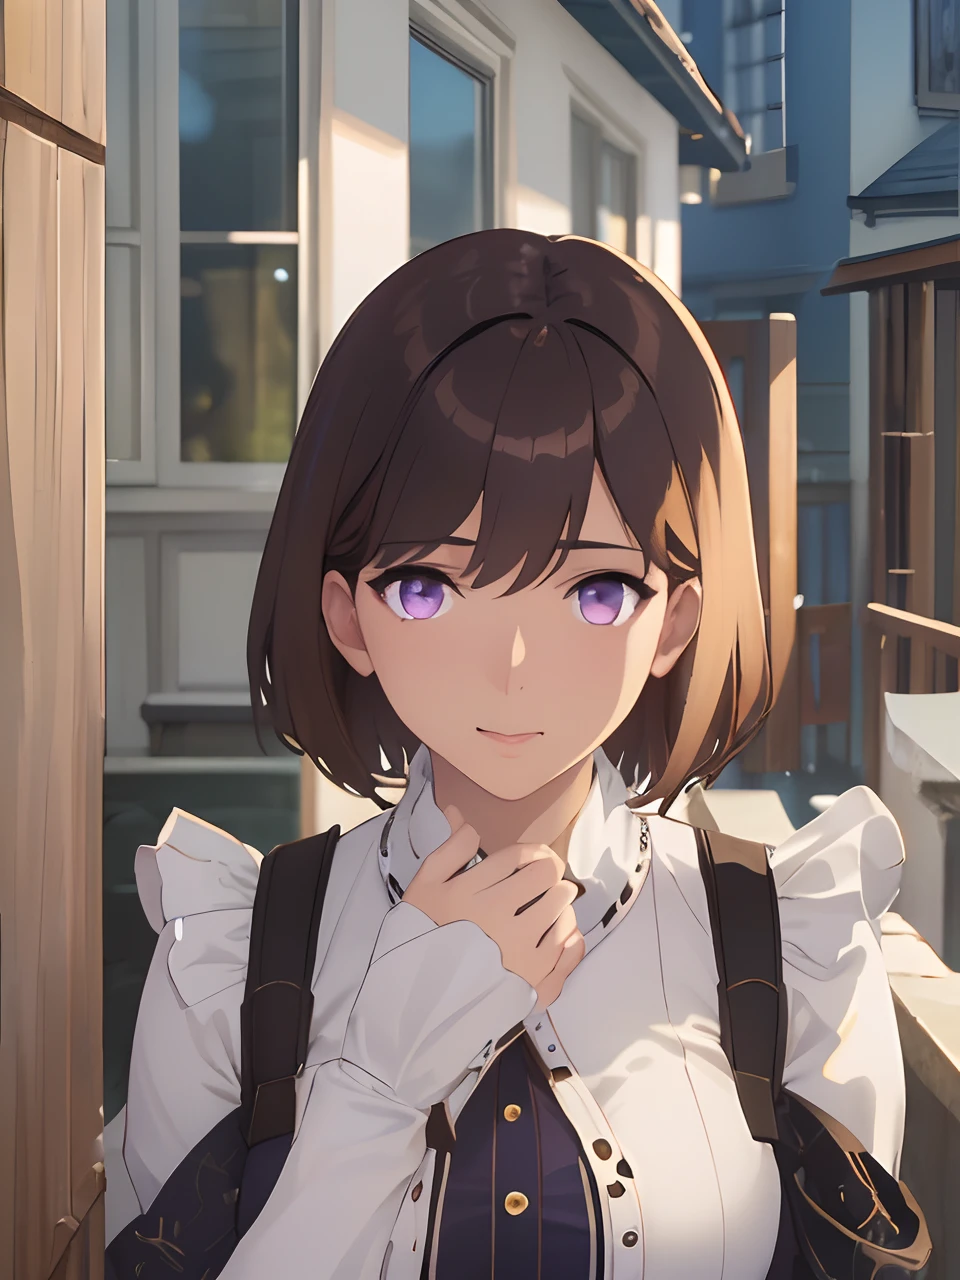 masterpiece, best quality, highres, best shadow, best illumination, finely detail, warm lighting, bright colors, 1girl, solo, purple eyes, beautiful face, short hair, brown hair, sexy, seductive, clean, pure face, skin, hyper realistic, ultra detailed, detailed eyes, lush body, dramatic lighting, (realistic) realistic, (masterpiece:1.3), (absurdists:1.3), (best quality:1.3), HD, FULL HD, bright lights, best quality, best quality, beautiful lighting, outdoor, (8k extremely detailed CG unit wallpaper), high details, sharp focus, dramatic and photorealistic midjourney painting art,